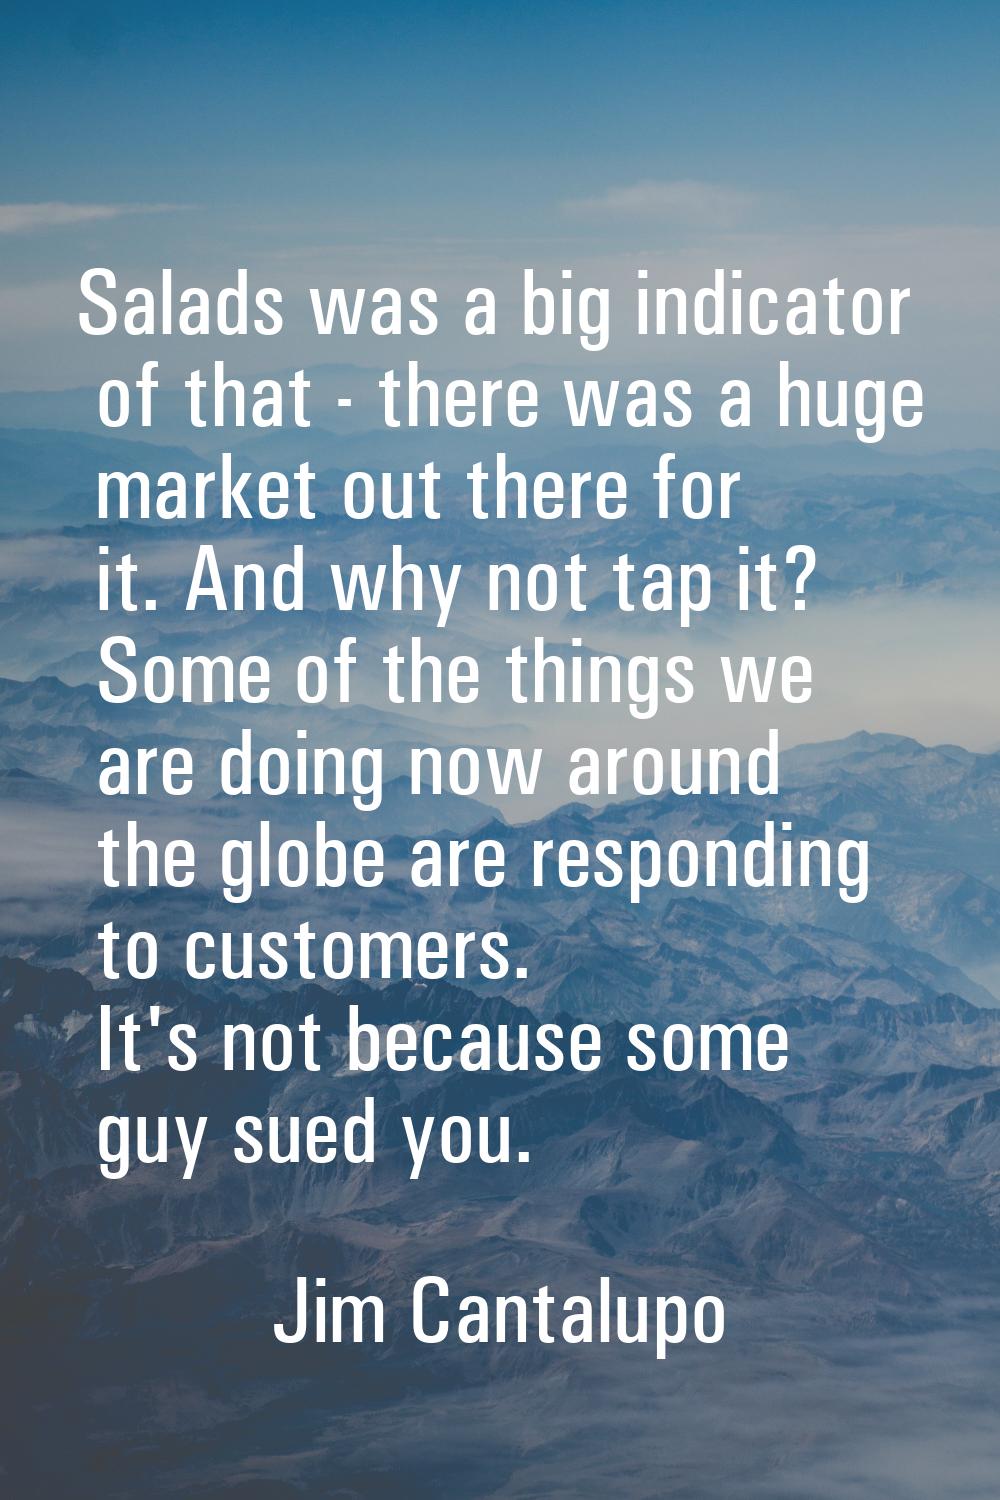 Salads was a big indicator of that - there was a huge market out there for it. And why not tap it? 